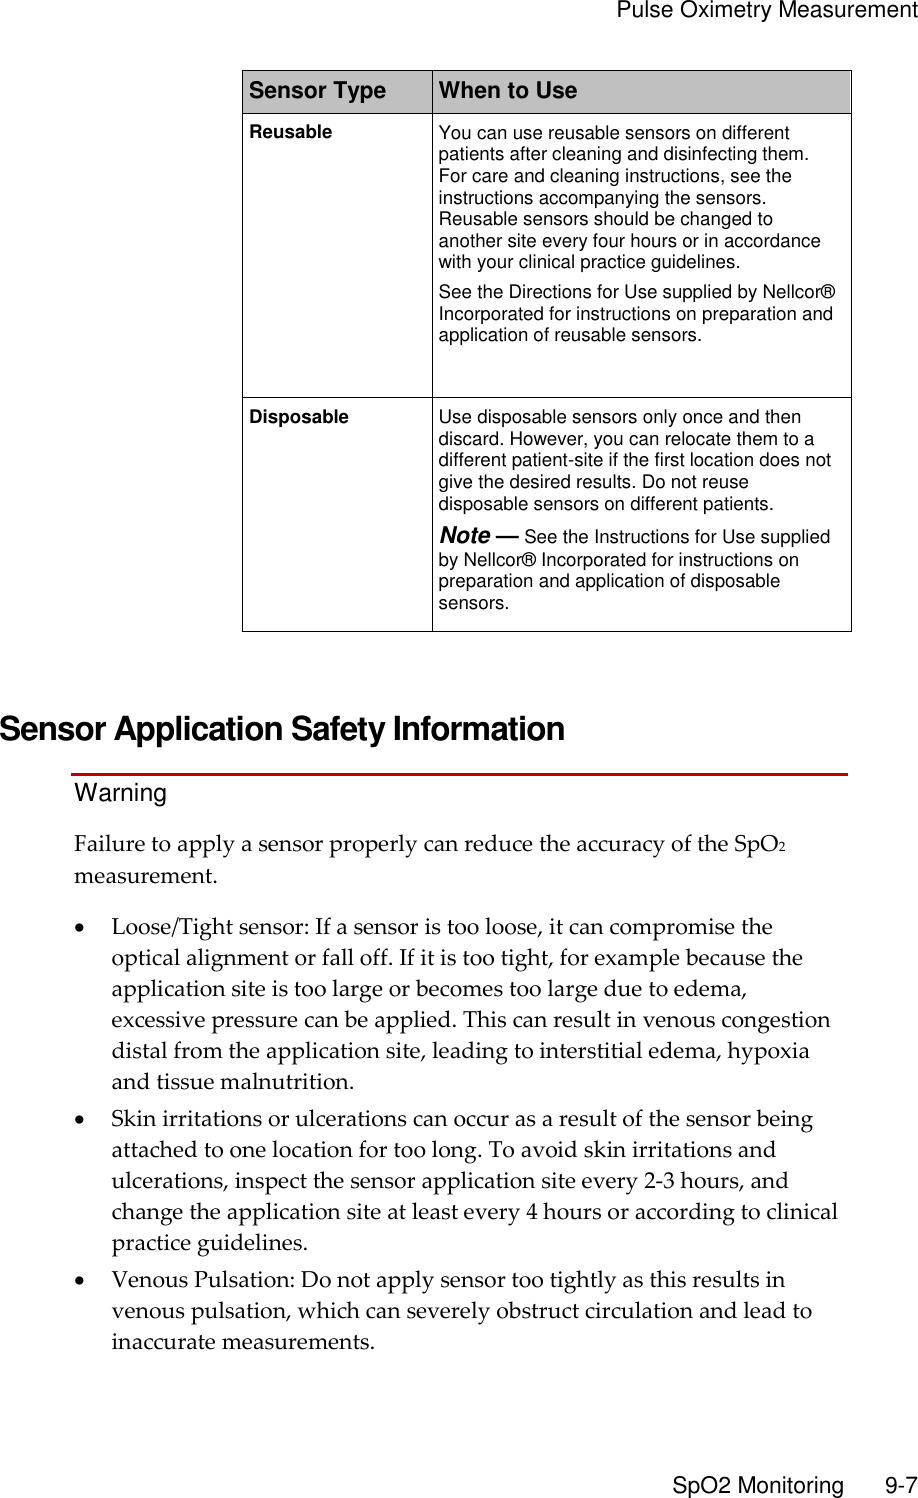     Pulse Oximetry Measurement       SpO2 Monitoring        9-7 Sensor Type When to Use Reusable You can use reusable sensors on different patients after cleaning and disinfecting them. For care and cleaning instructions, see the instructions accompanying the sensors. Reusable sensors should be changed to another site every four hours or in accordance with your clinical practice guidelines. See the Directions for Use supplied by Nellcor® Incorporated for instructions on preparation and application of reusable sensors. Disposable Use disposable sensors only once and then discard. However, you can relocate them to a different patient-site if the first location does not give the desired results. Do not reuse disposable sensors on different patients. Note — See the Instructions for Use supplied by Nellcor® Incorporated for instructions on preparation and application of disposable sensors.   Sensor Application Safety Information Warning Failure to apply a sensor properly can reduce the accuracy of the SpO2 measurement.  Loose/Tight sensor: If a sensor is too loose, it can compromise the optical alignment or fall off. If it is too tight, for example because the application site is too large or becomes too large due to edema, excessive pressure can be applied. This can result in venous congestion distal from the application site, leading to interstitial edema, hypoxia and tissue malnutrition.  Skin irritations or ulcerations can occur as a result of the sensor being attached to one location for too long. To avoid skin irritations and ulcerations, inspect the sensor application site every 2-3 hours, and change the application site at least every 4 hours or according to clinical practice guidelines.  Venous Pulsation: Do not apply sensor too tightly as this results in venous pulsation, which can severely obstruct circulation and lead to inaccurate measurements. 